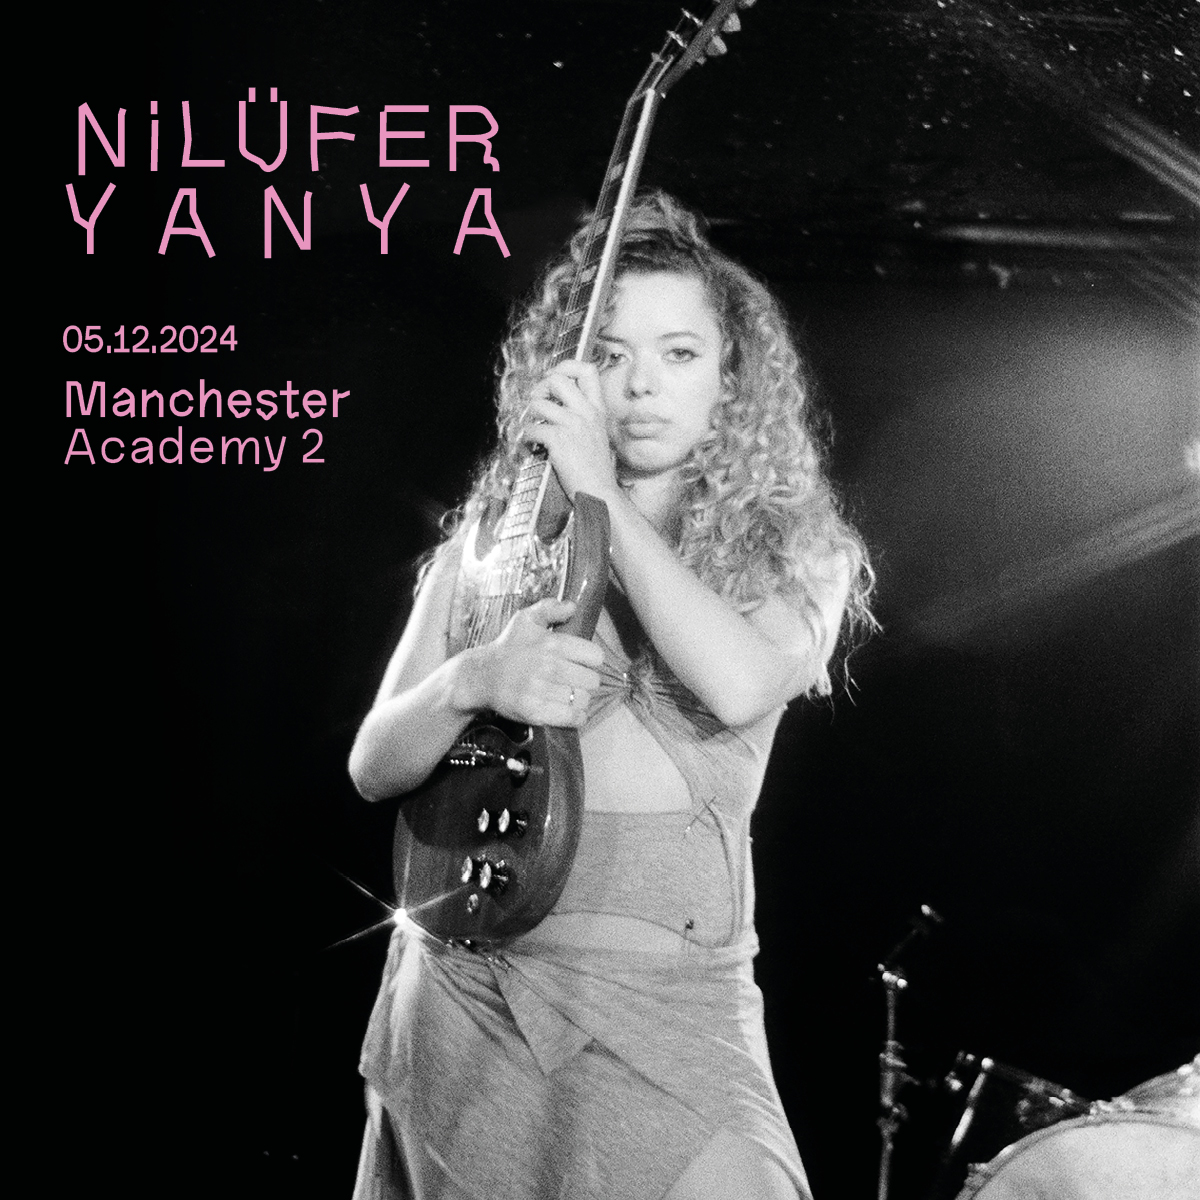 Critically-acclaimed singer & songwriter @niluferyanya will make her way to @MancAcademy in December! ❤️‍🔥 Tickets on sale this Friday at 10am via tix.to/NYANYA